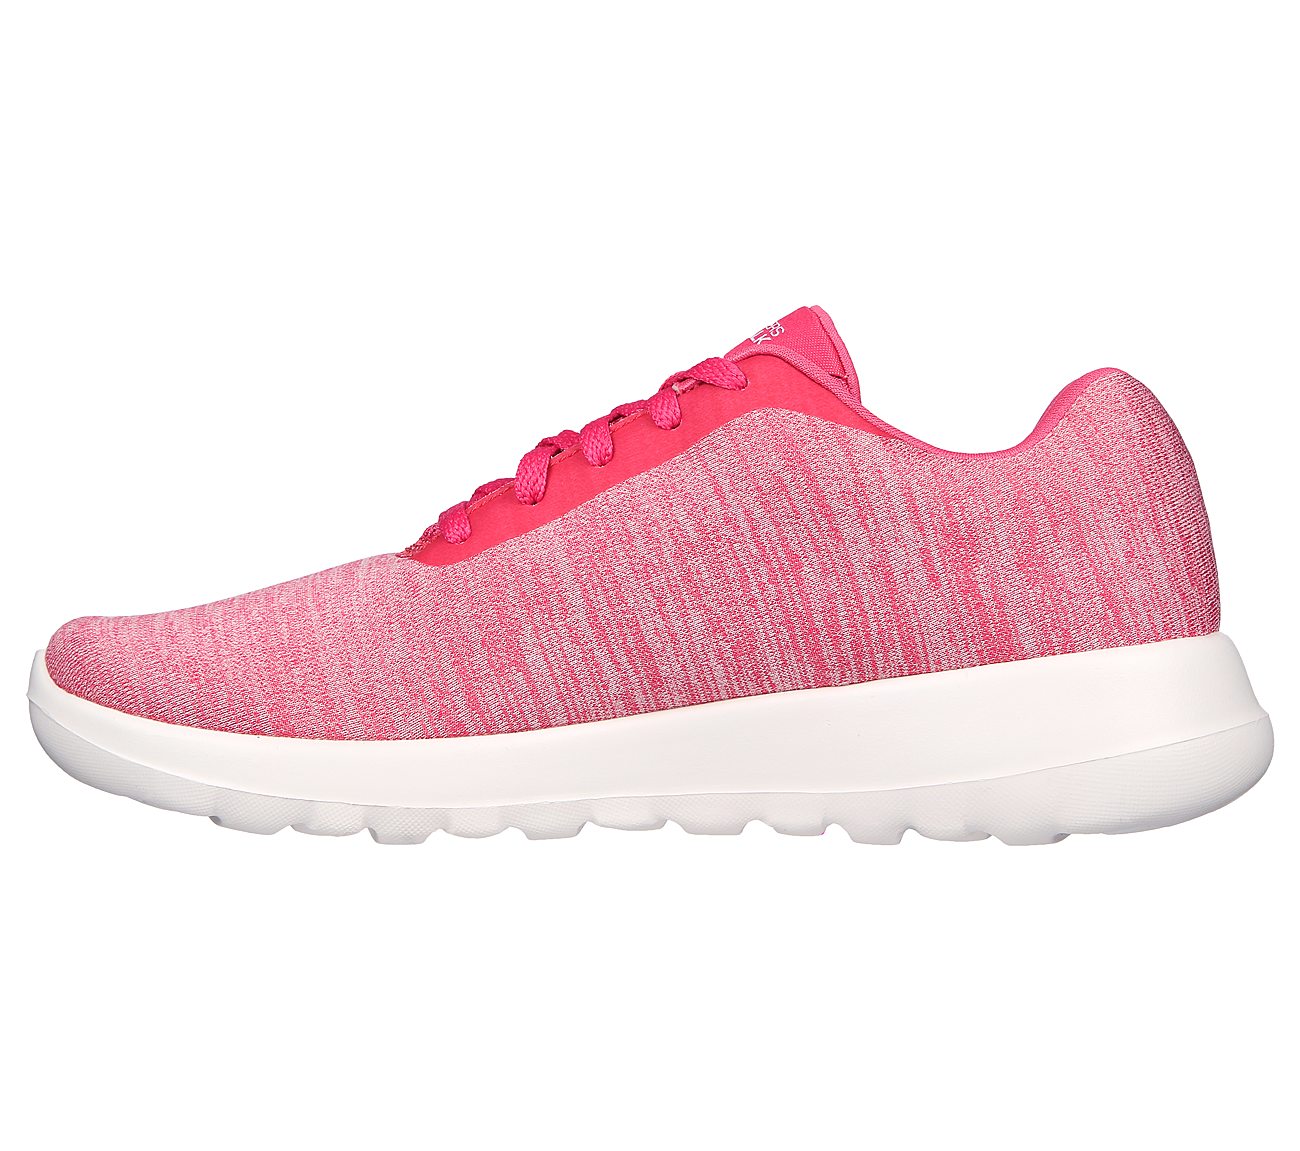 Skechers Hot Pink Go Walk Joy Lace Up Shoes For Women - Style ID: 15633 ...